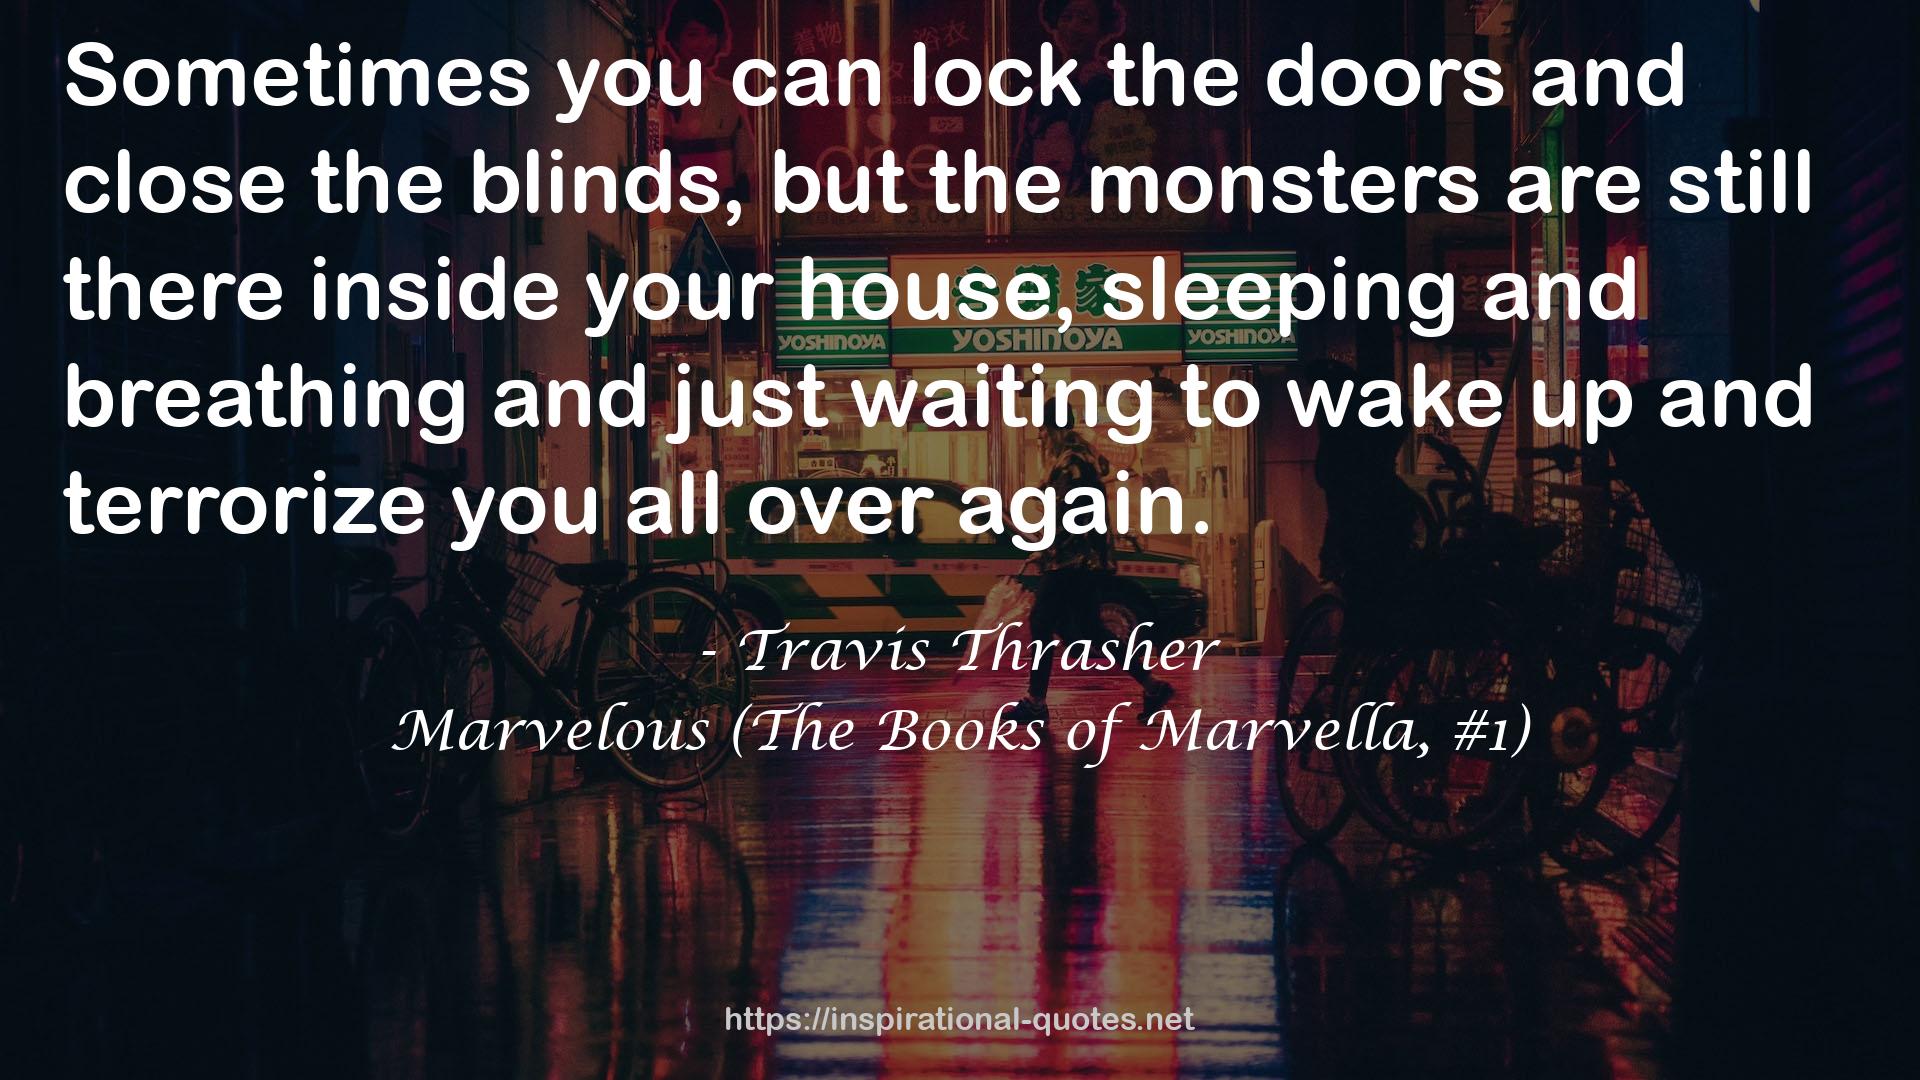 Marvelous (The Books of Marvella, #1) QUOTES